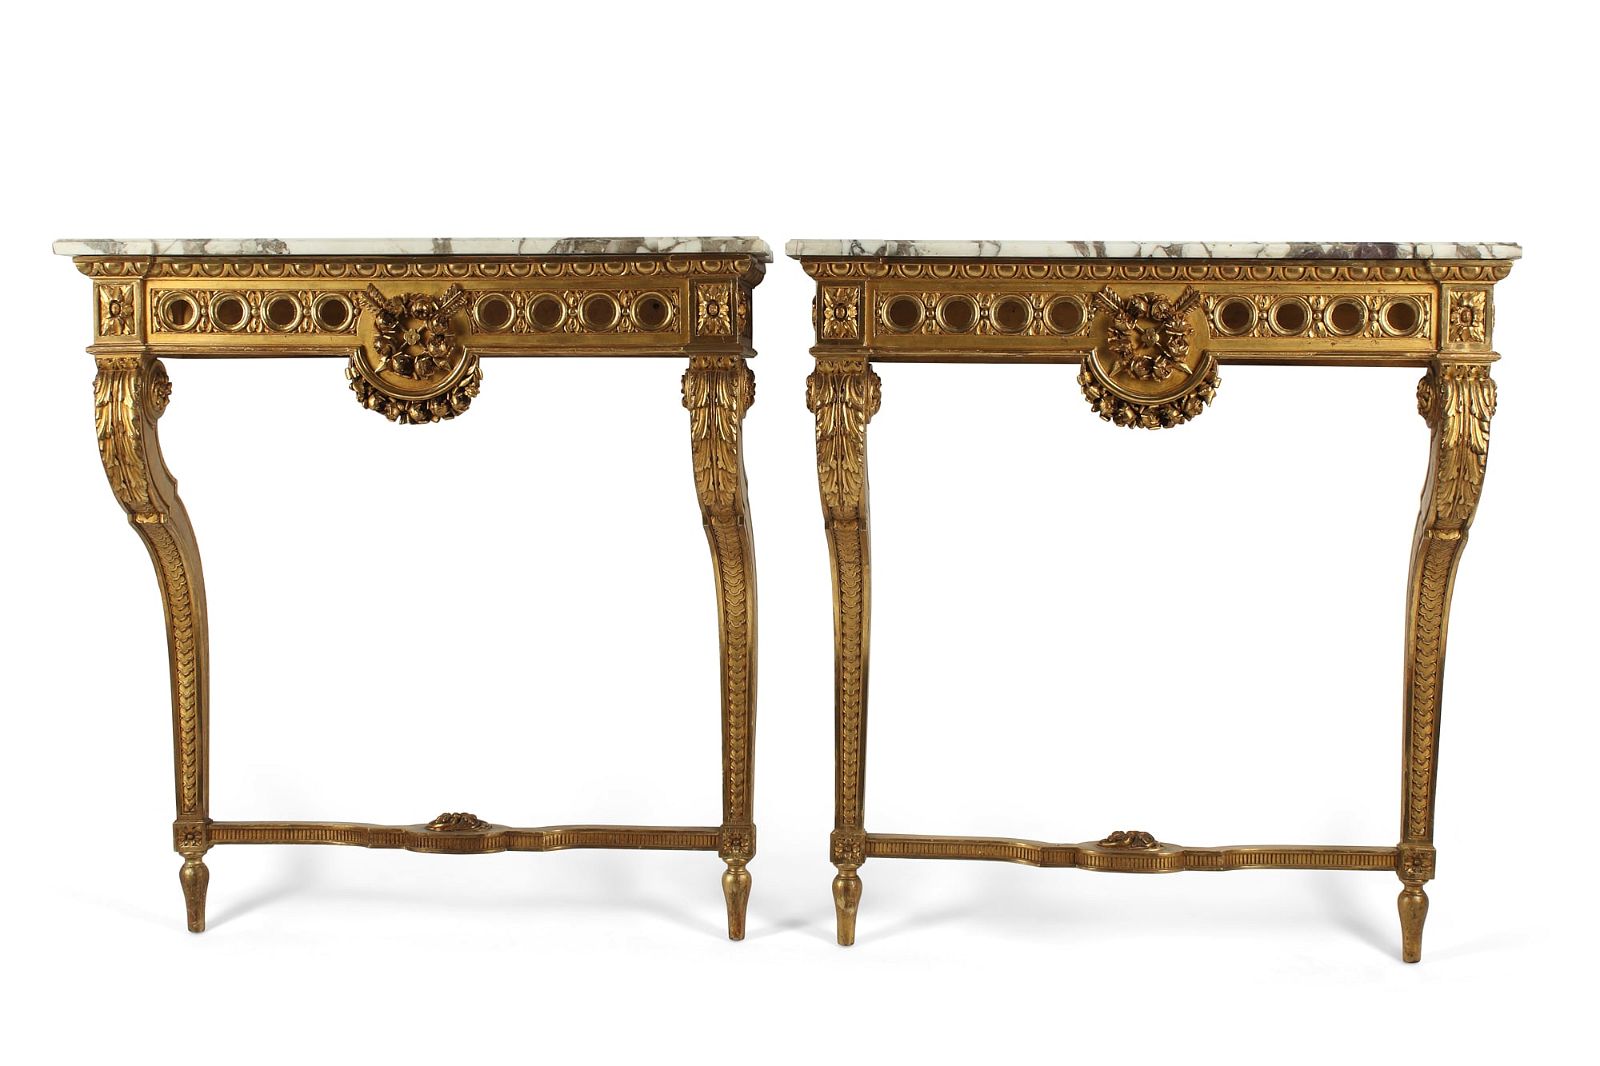 A PAIR OF LOUIS XVI STYLE CARVED